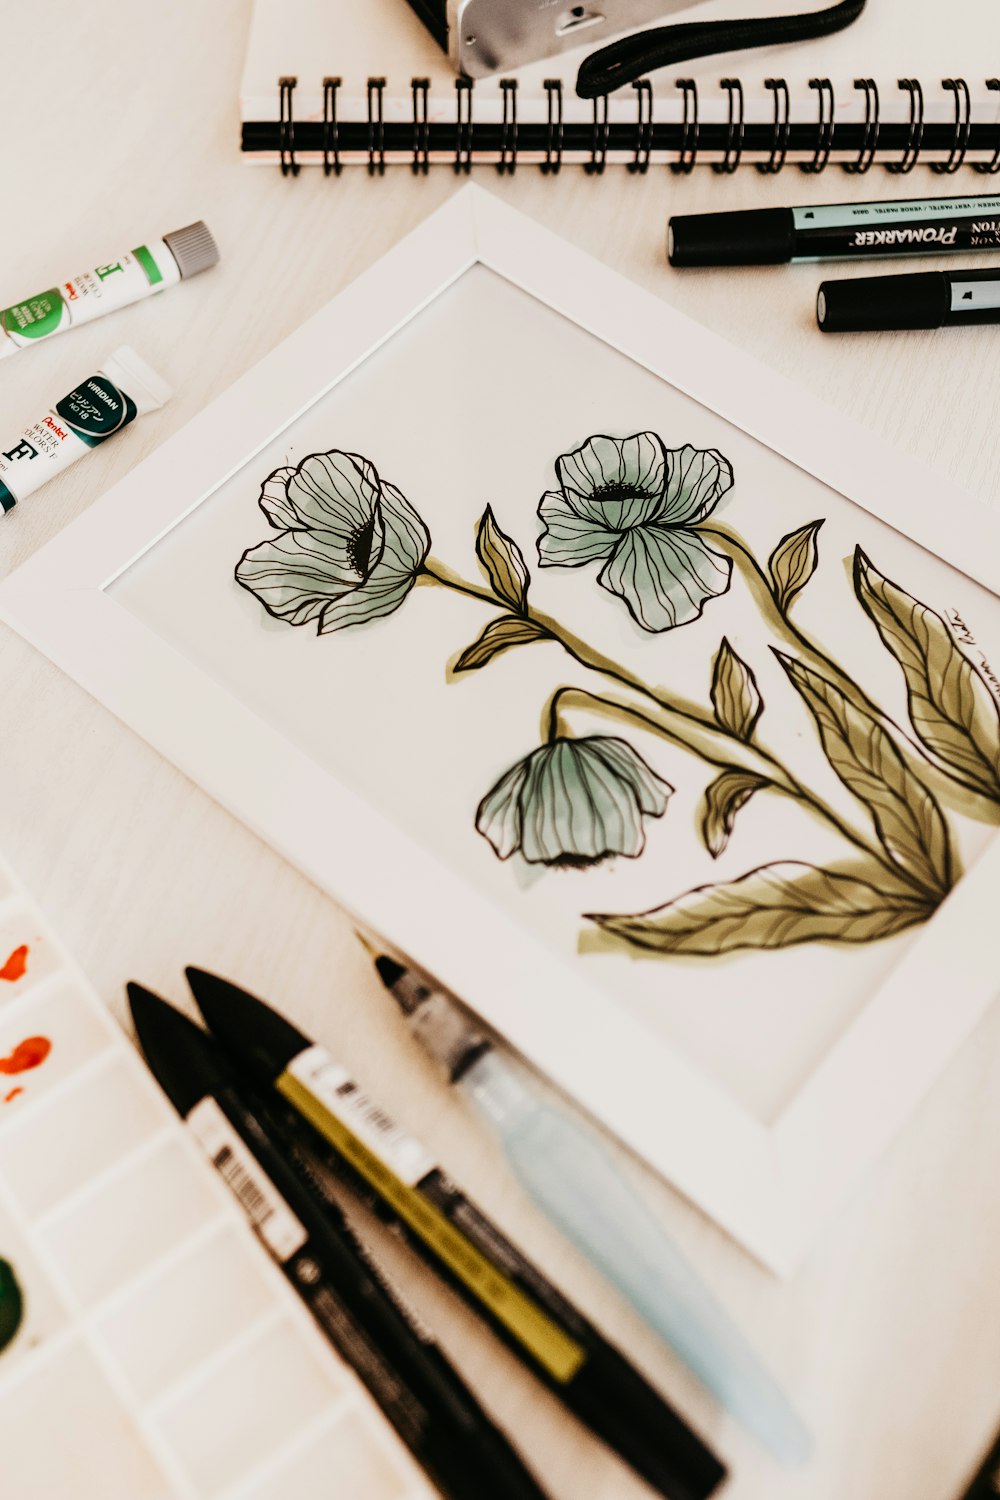 999+ Pencil Drawing Pictures | Download Free Images on Unsplash